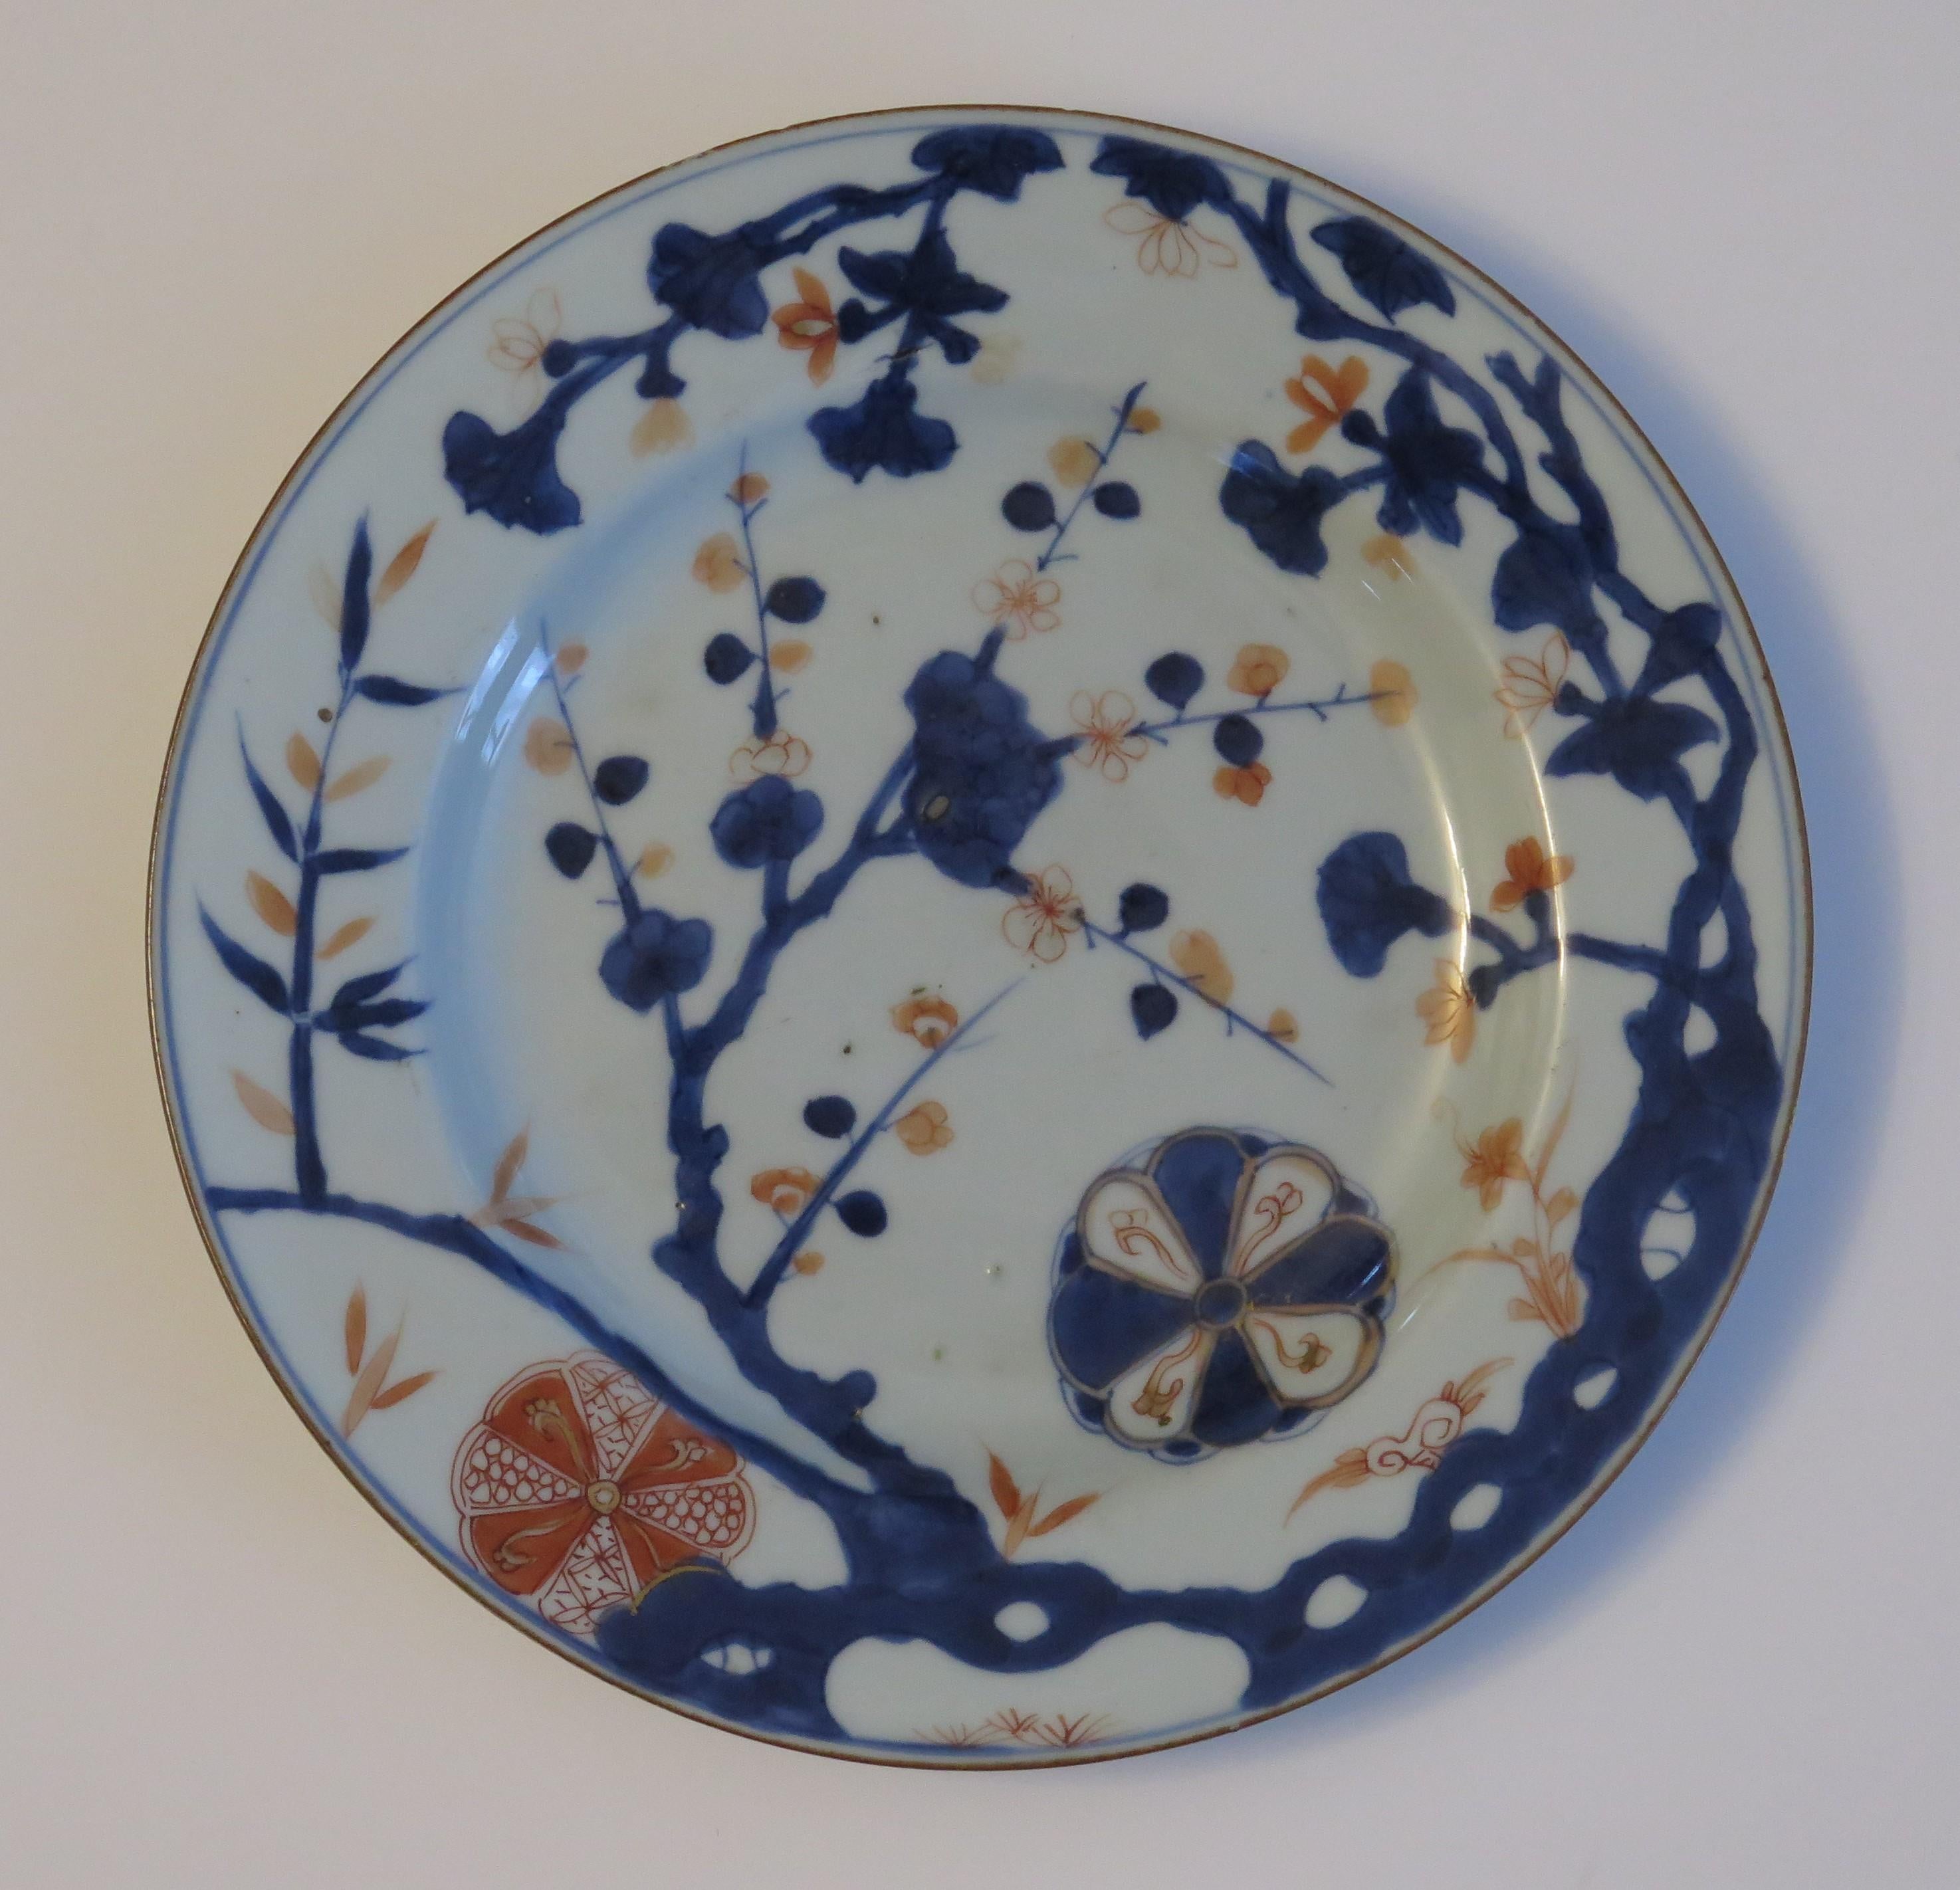 This is a beautifully hand painted Chinese Export porcelain Plate from the Qing, Kangxi period, 1662-1722.

The plate is finely potted with a carefully cut base rim and a lovely rich glassy, white glaze with a light blue tinge.

The plate is